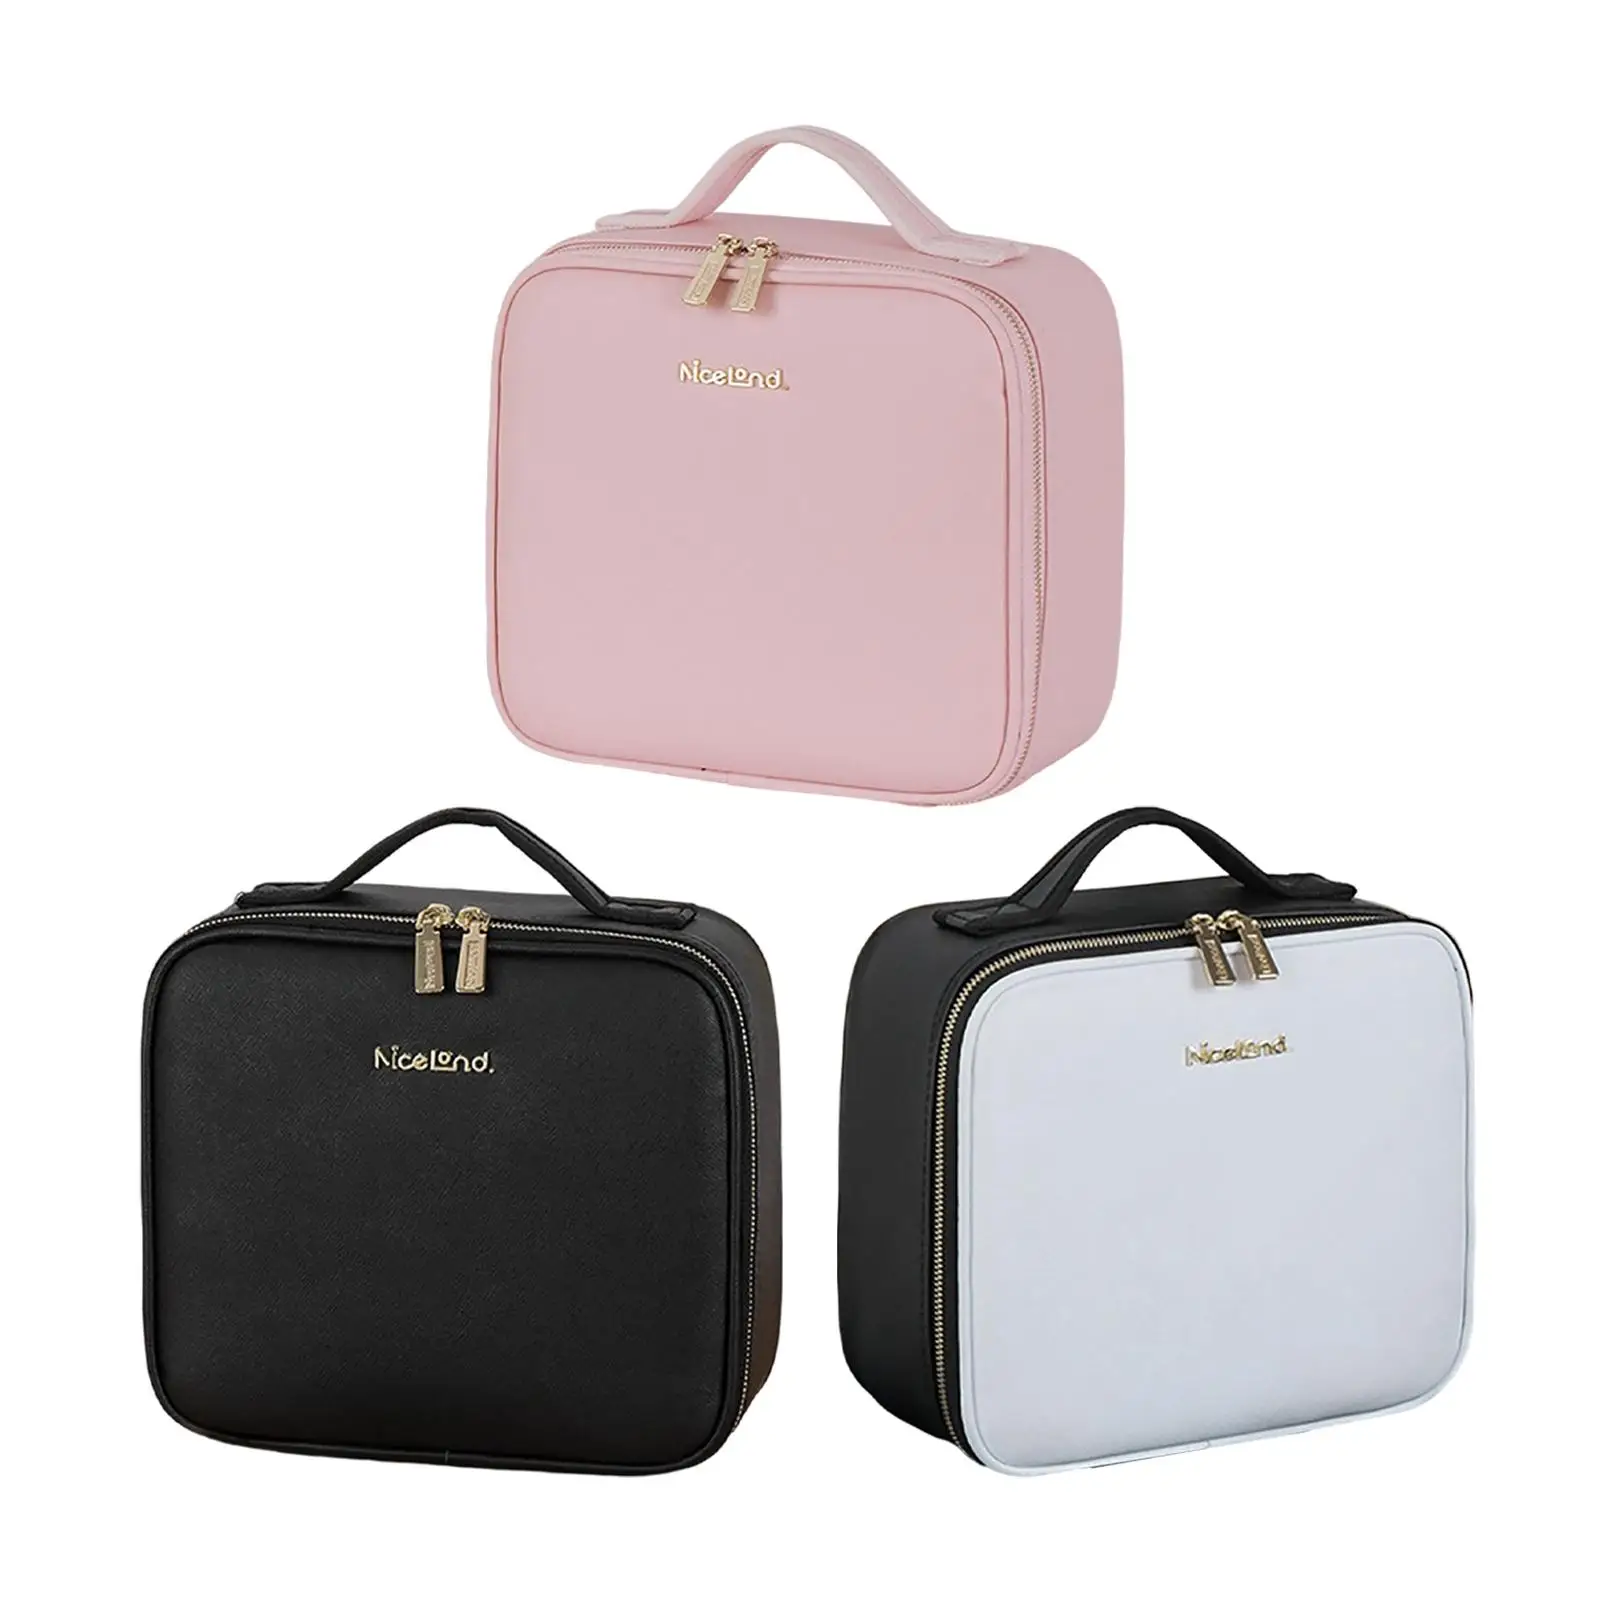 Train Makeup Case with Portable Multifunction for Makeup Brushes